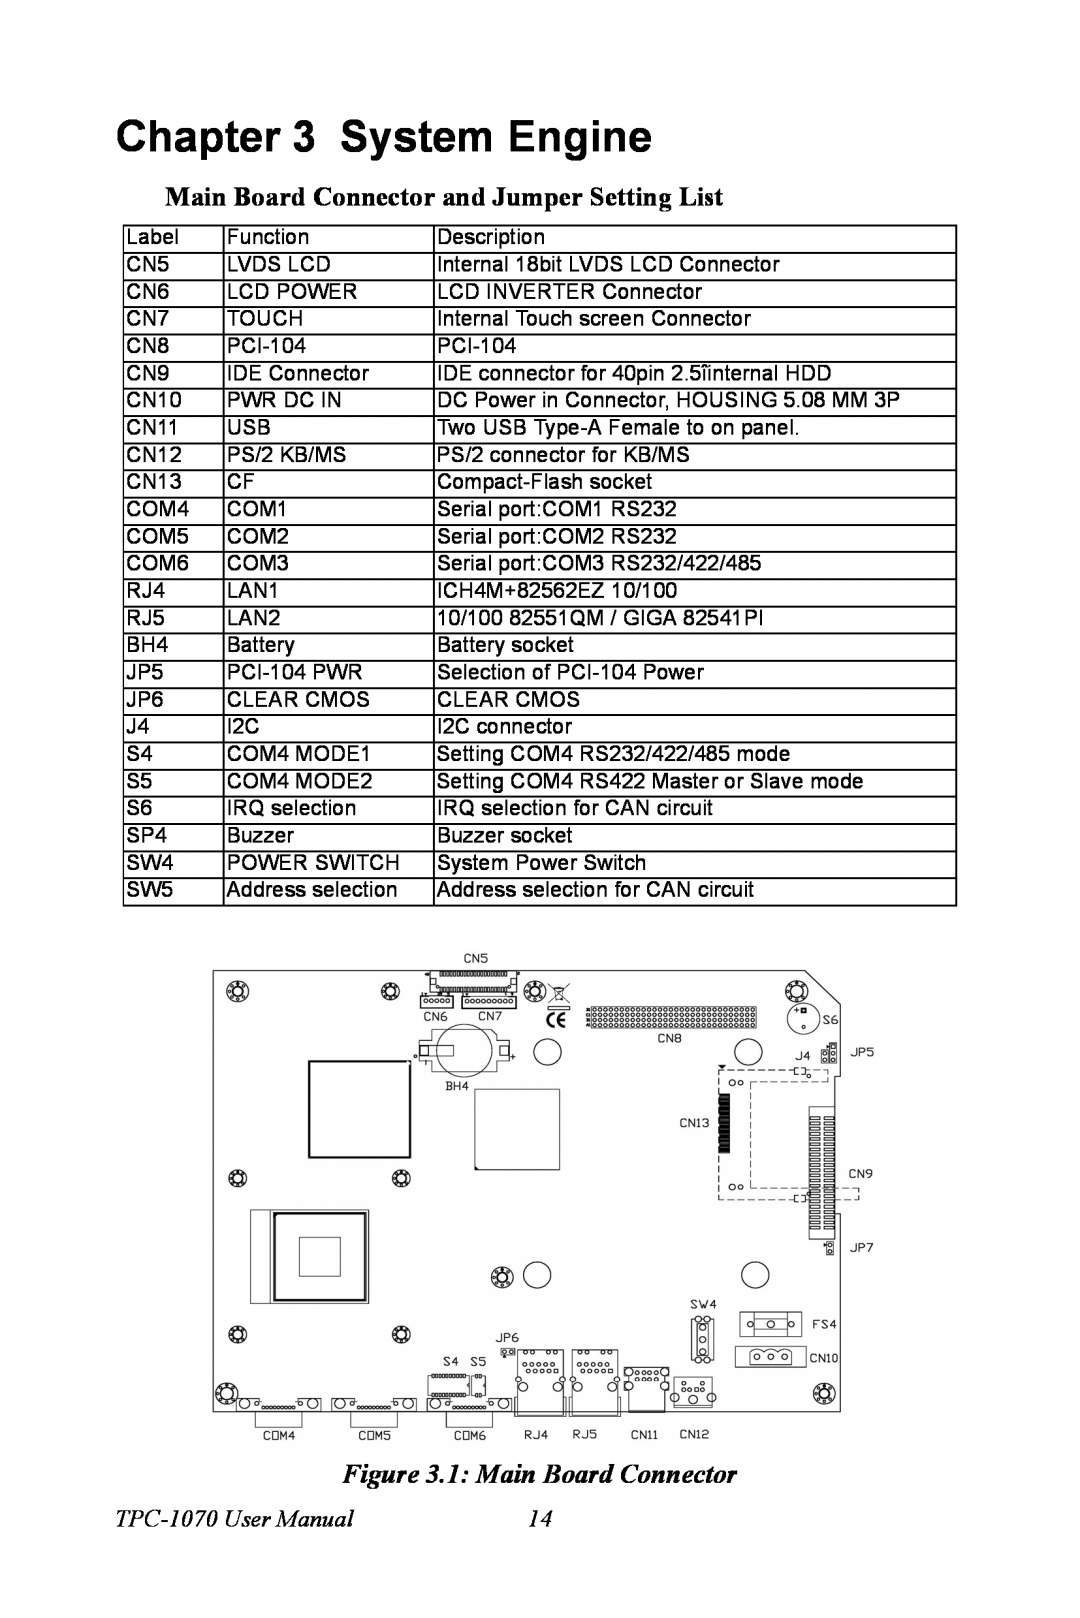 Intel System Engine, Main Board Connector and Jumper Setting List, 1 Main Board Connector, TPC-1070 User Manual 